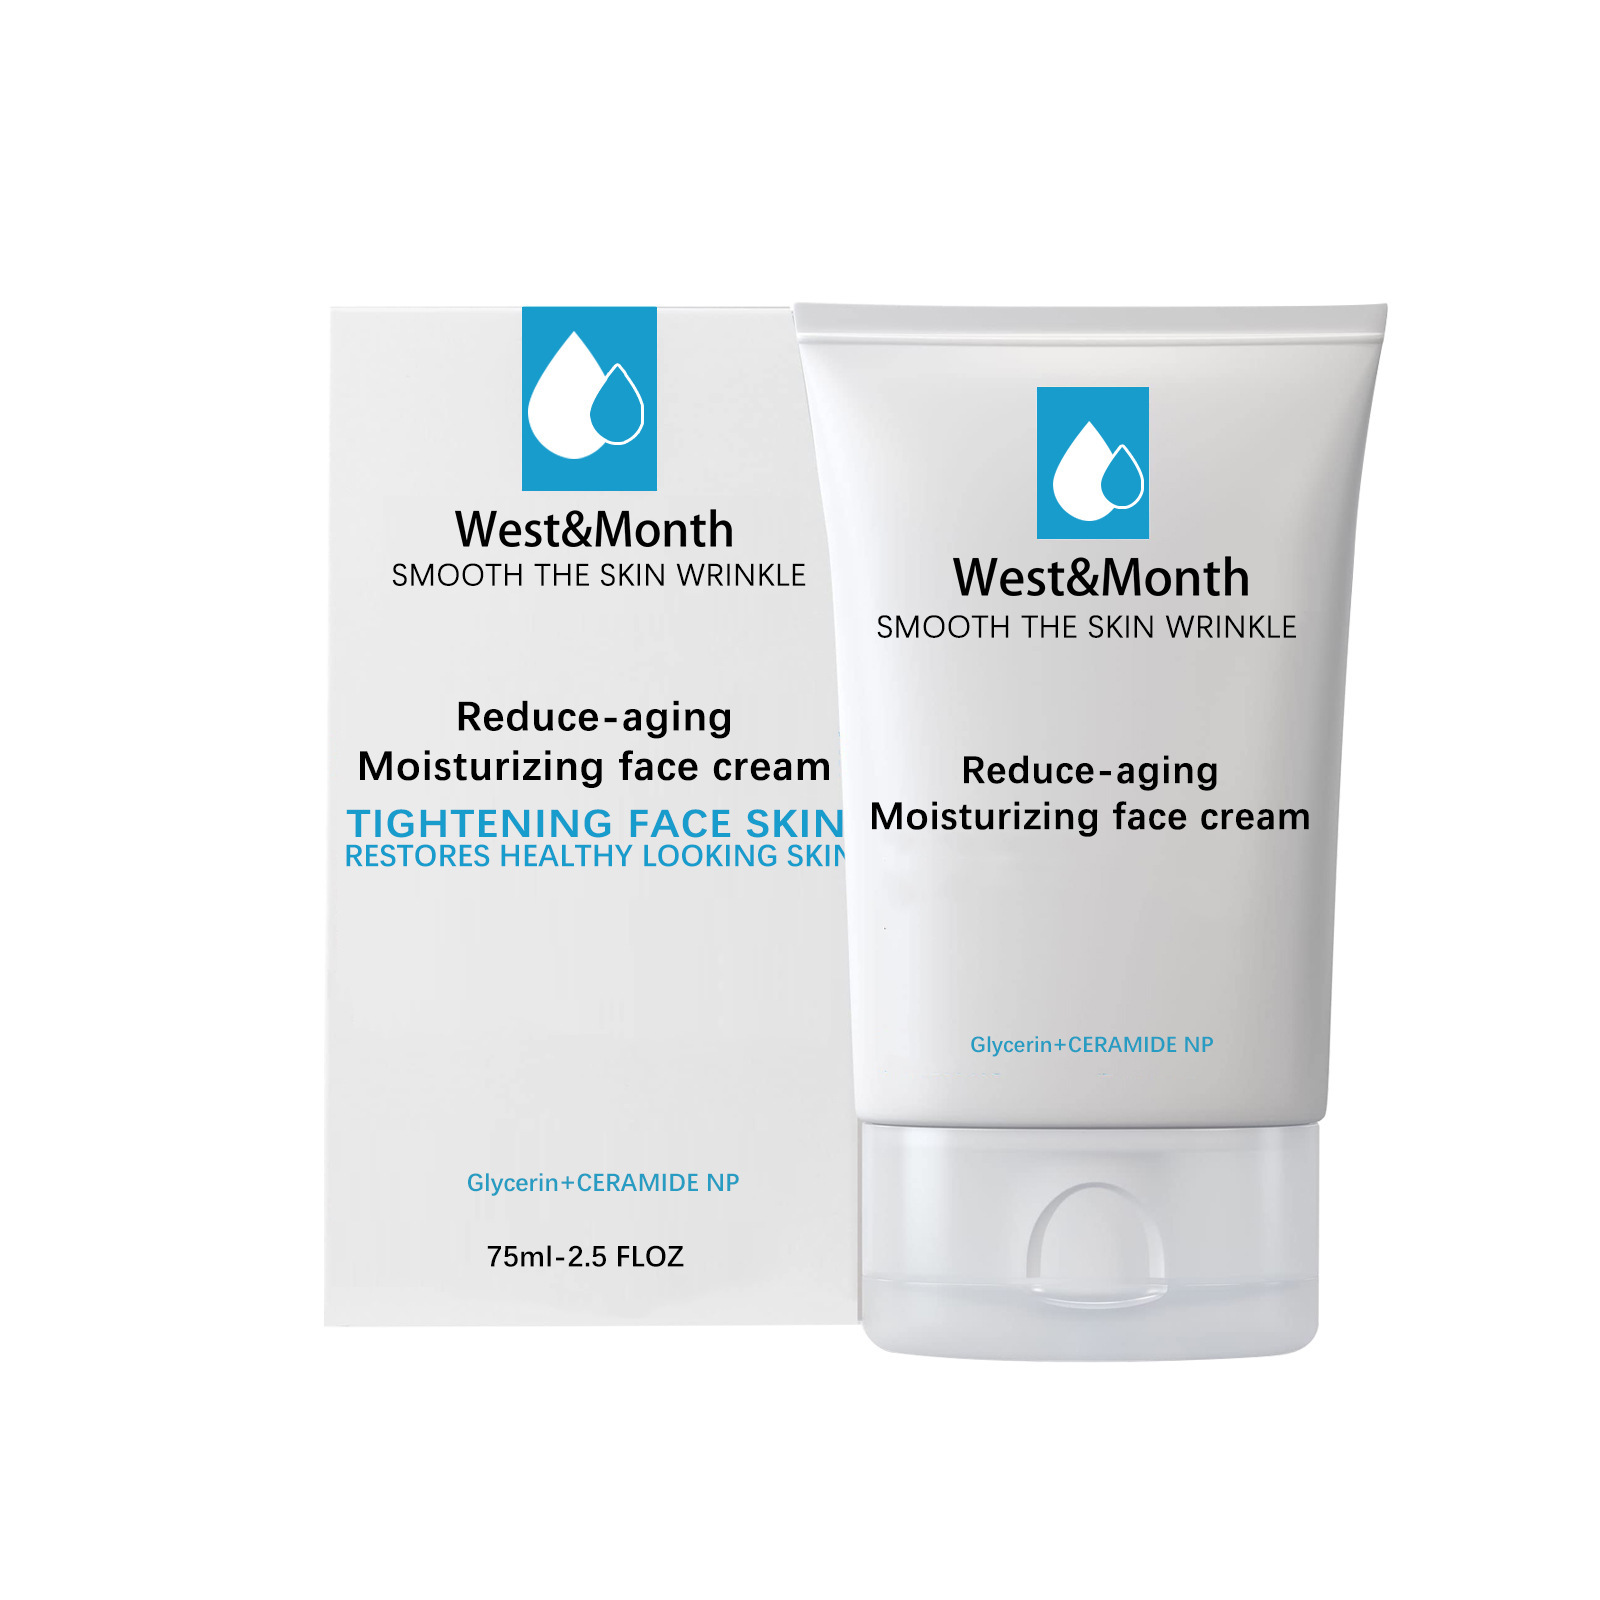 West & Month Anti-Aging Moisturizing Cream Fade Wrinkles French Lines Facial Firming Skin Anti-Wrinkle Face Cream